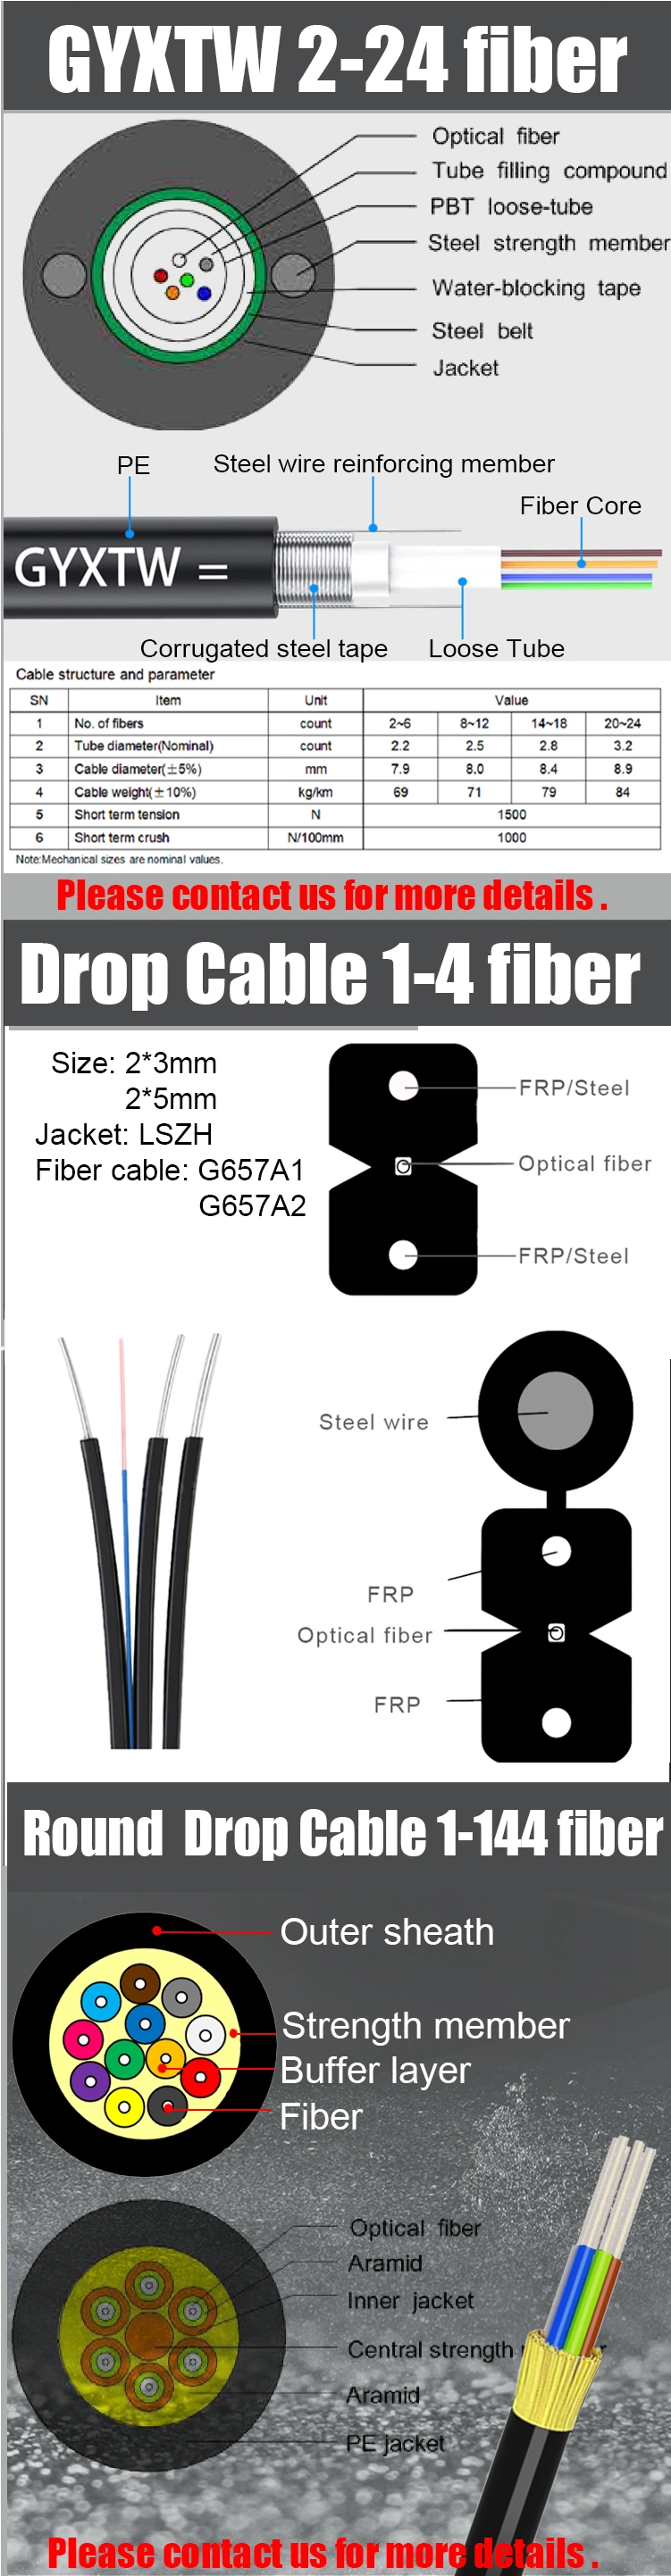 Gcabling Loose Tube Tight Buffered Cable Outdoor GYXTW GYTS ADSS Indoor FTTH Optical Cable